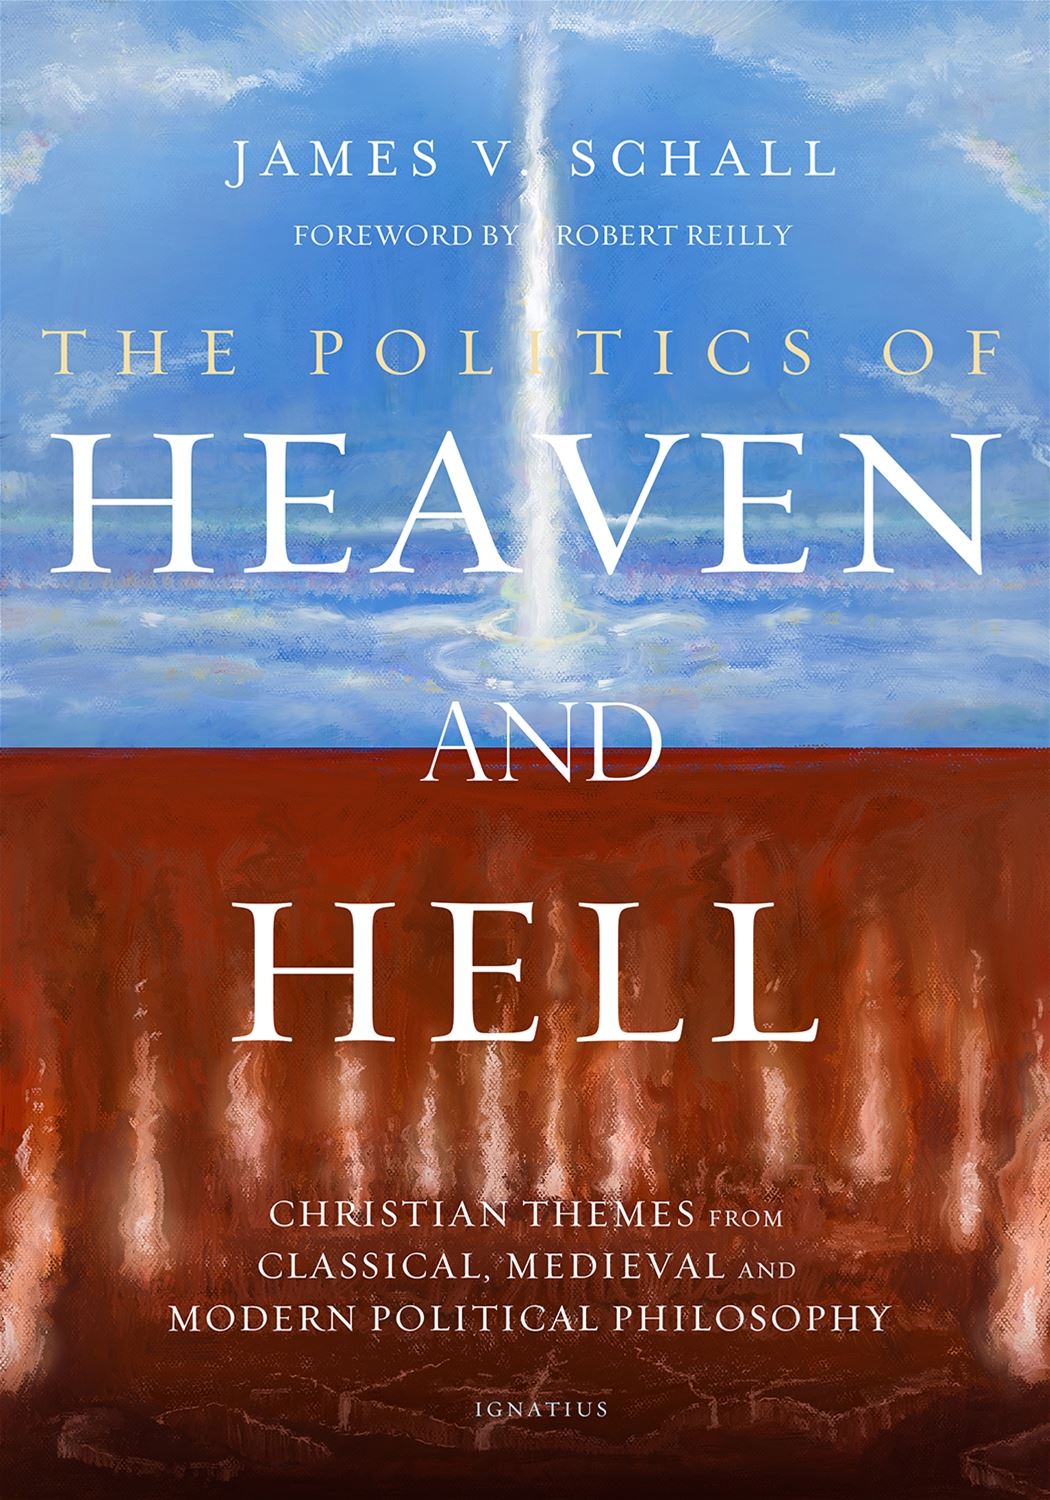 The Politics of Heaven and Hell Christian Themes from Classical, Medieval, and Modern Political Philosophy By: Fr. James V. Schall S.J.